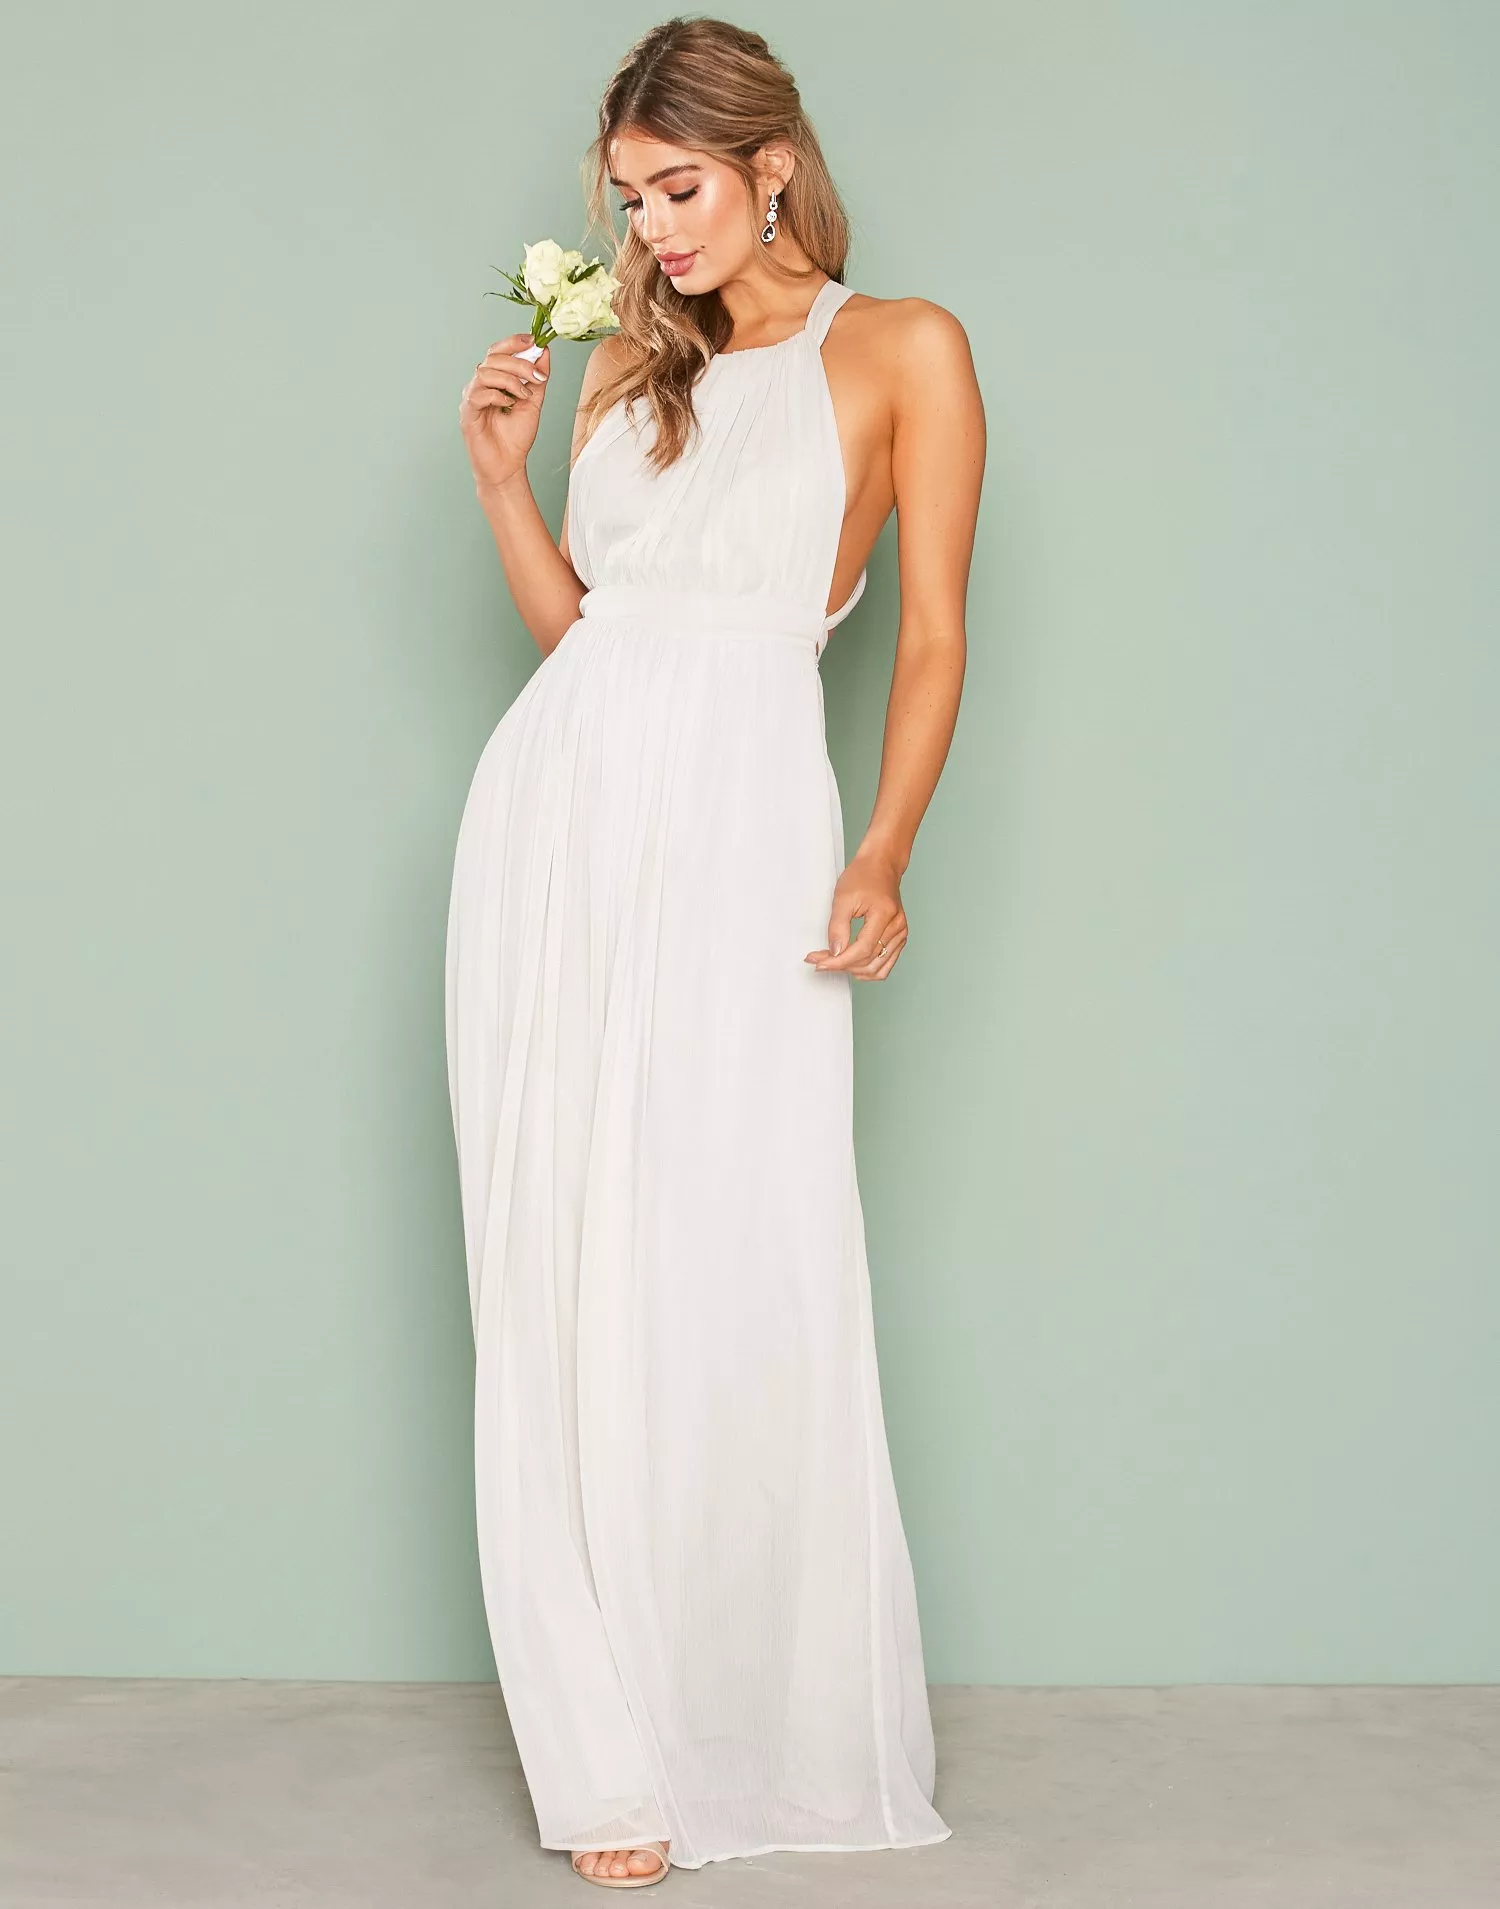 Buy Nelly Tied Back Gown - Light Gray | Nelly.com